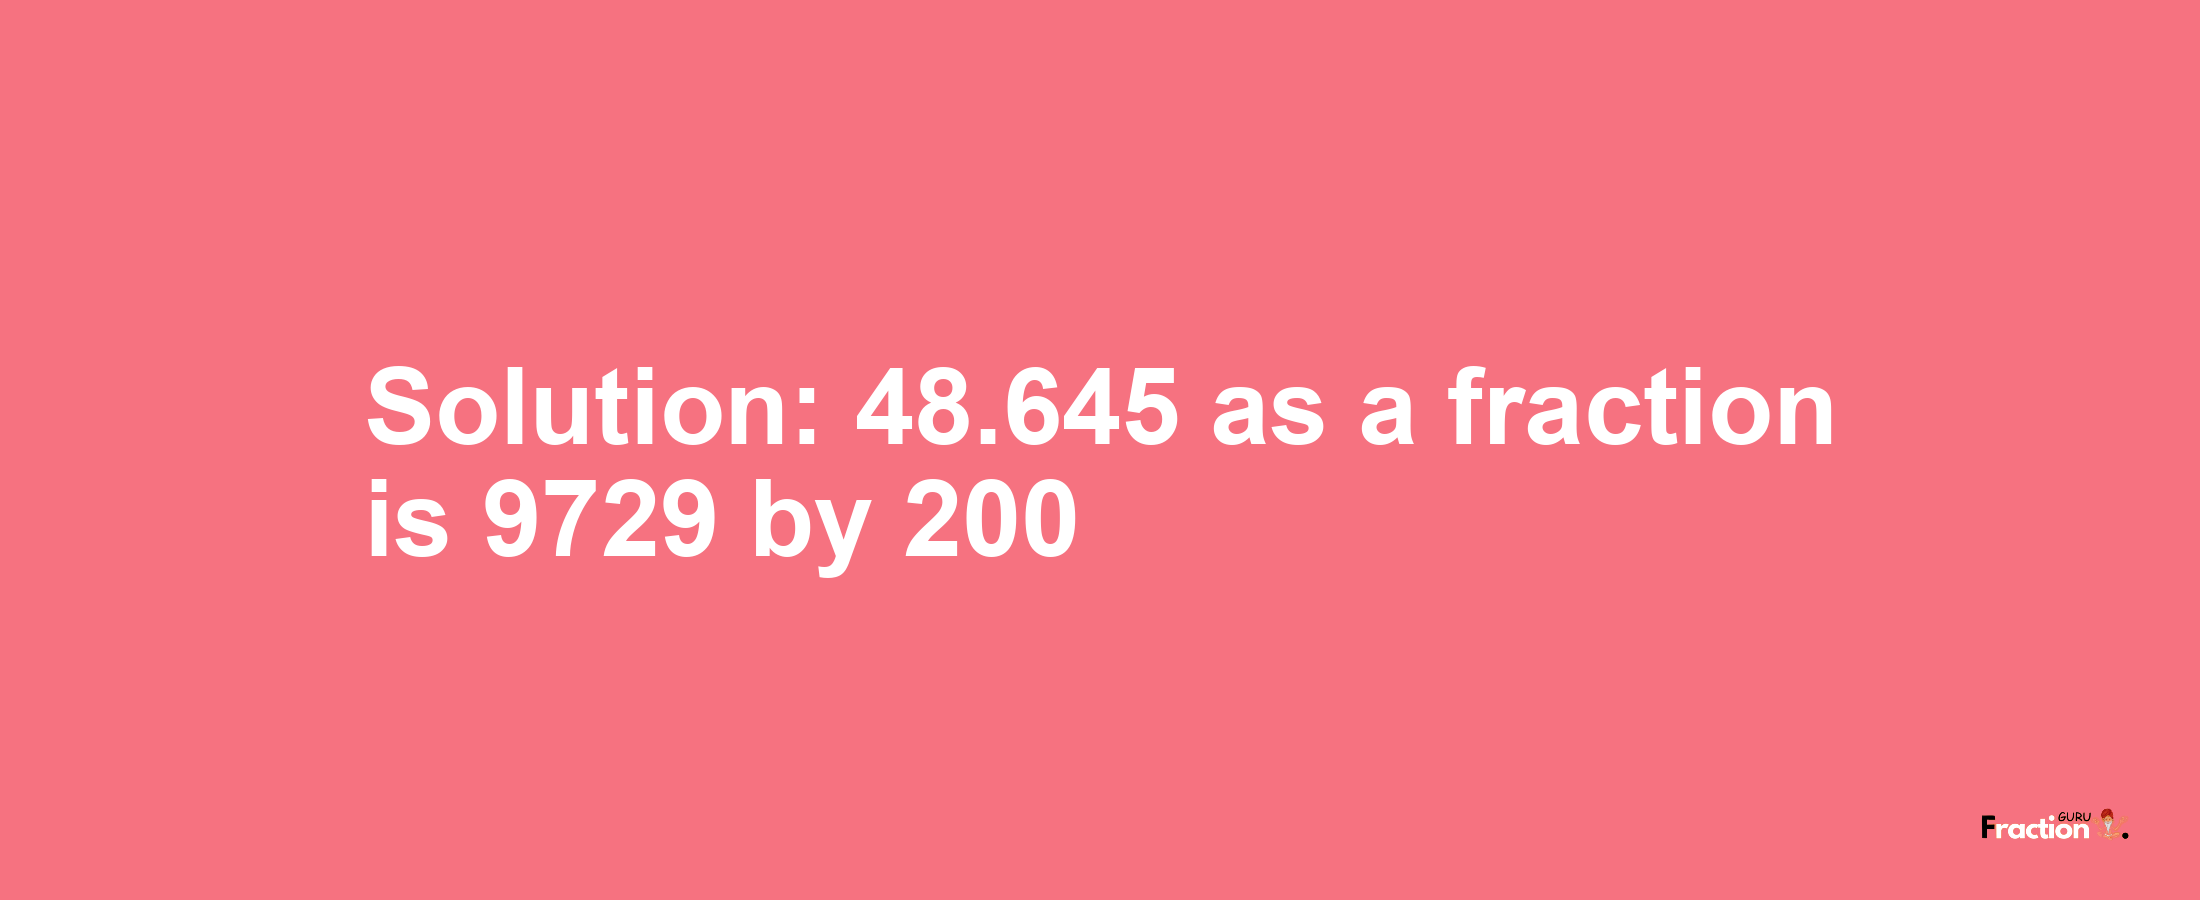 Solution:48.645 as a fraction is 9729/200